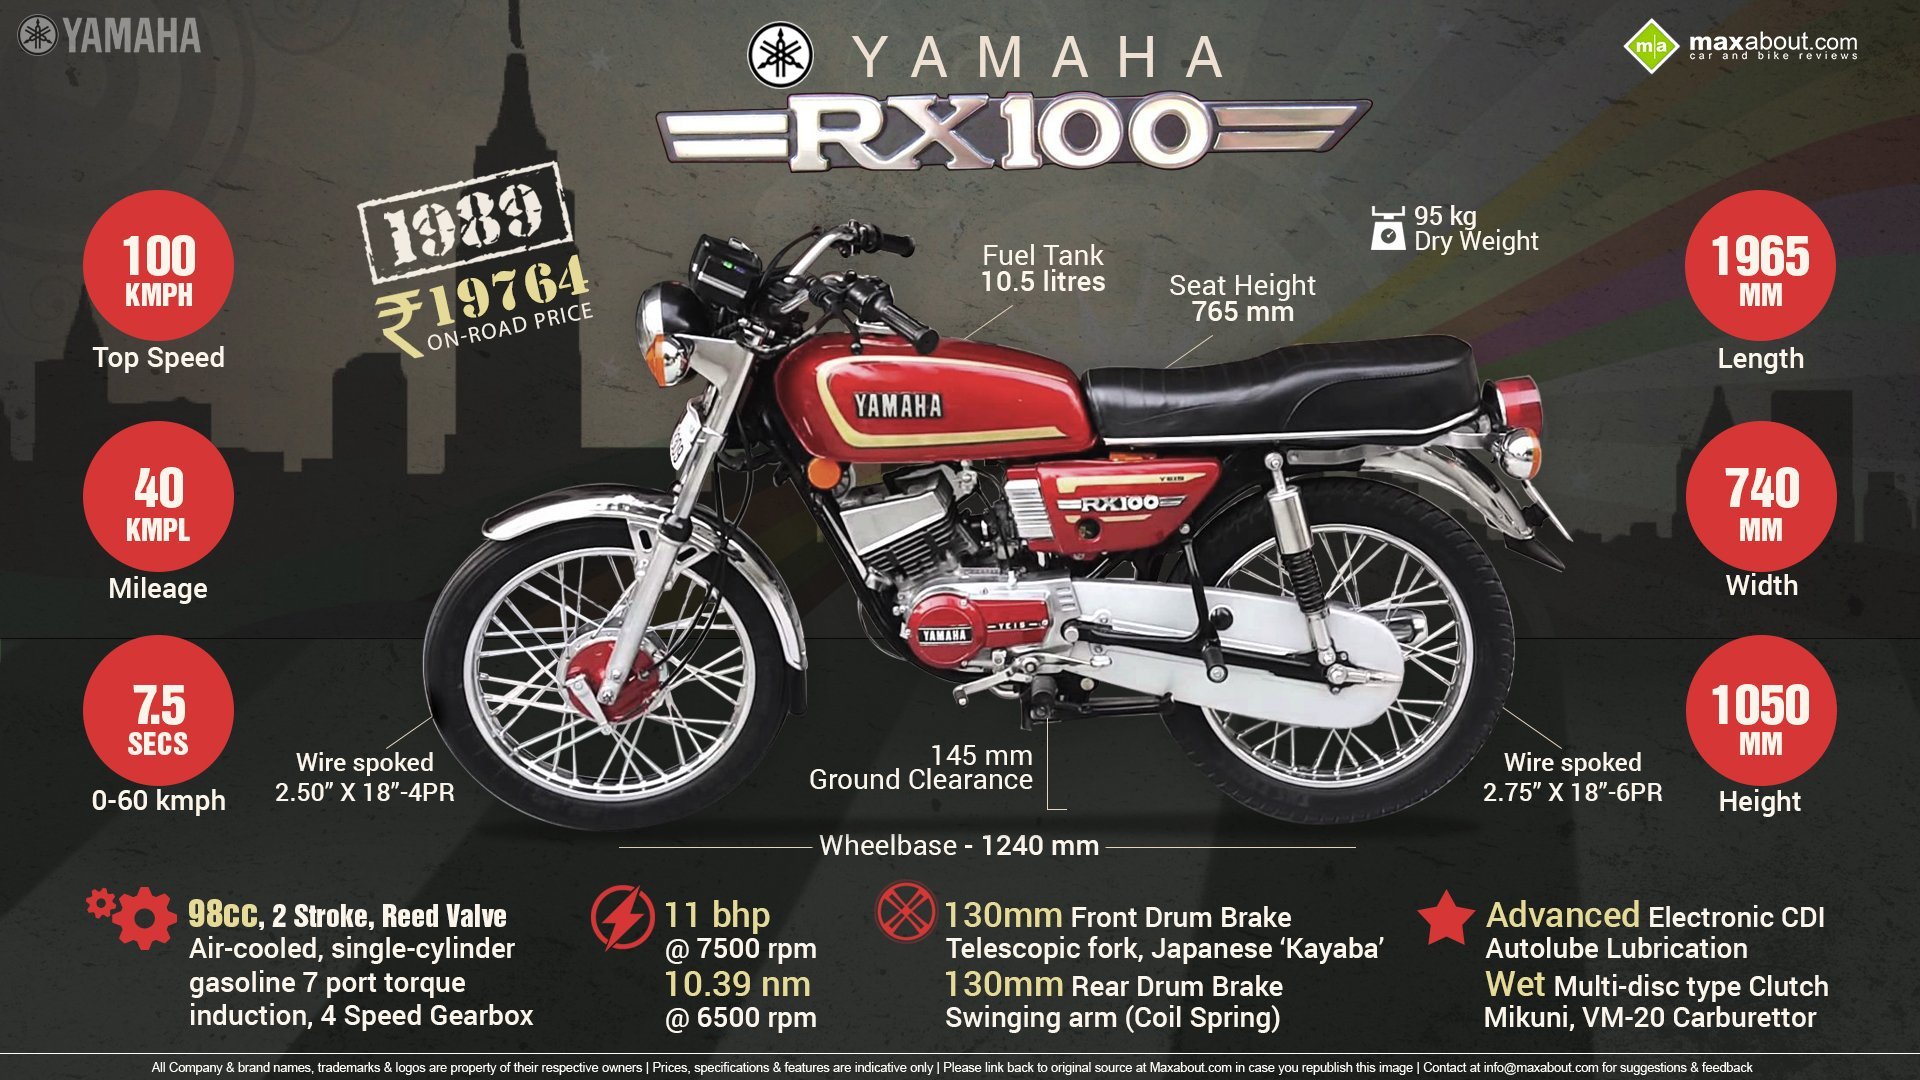 Yamaha Rx 100 Yamaha Is Going To Launch A Bike At A Price Of Rs 16000 Headlines Of Today